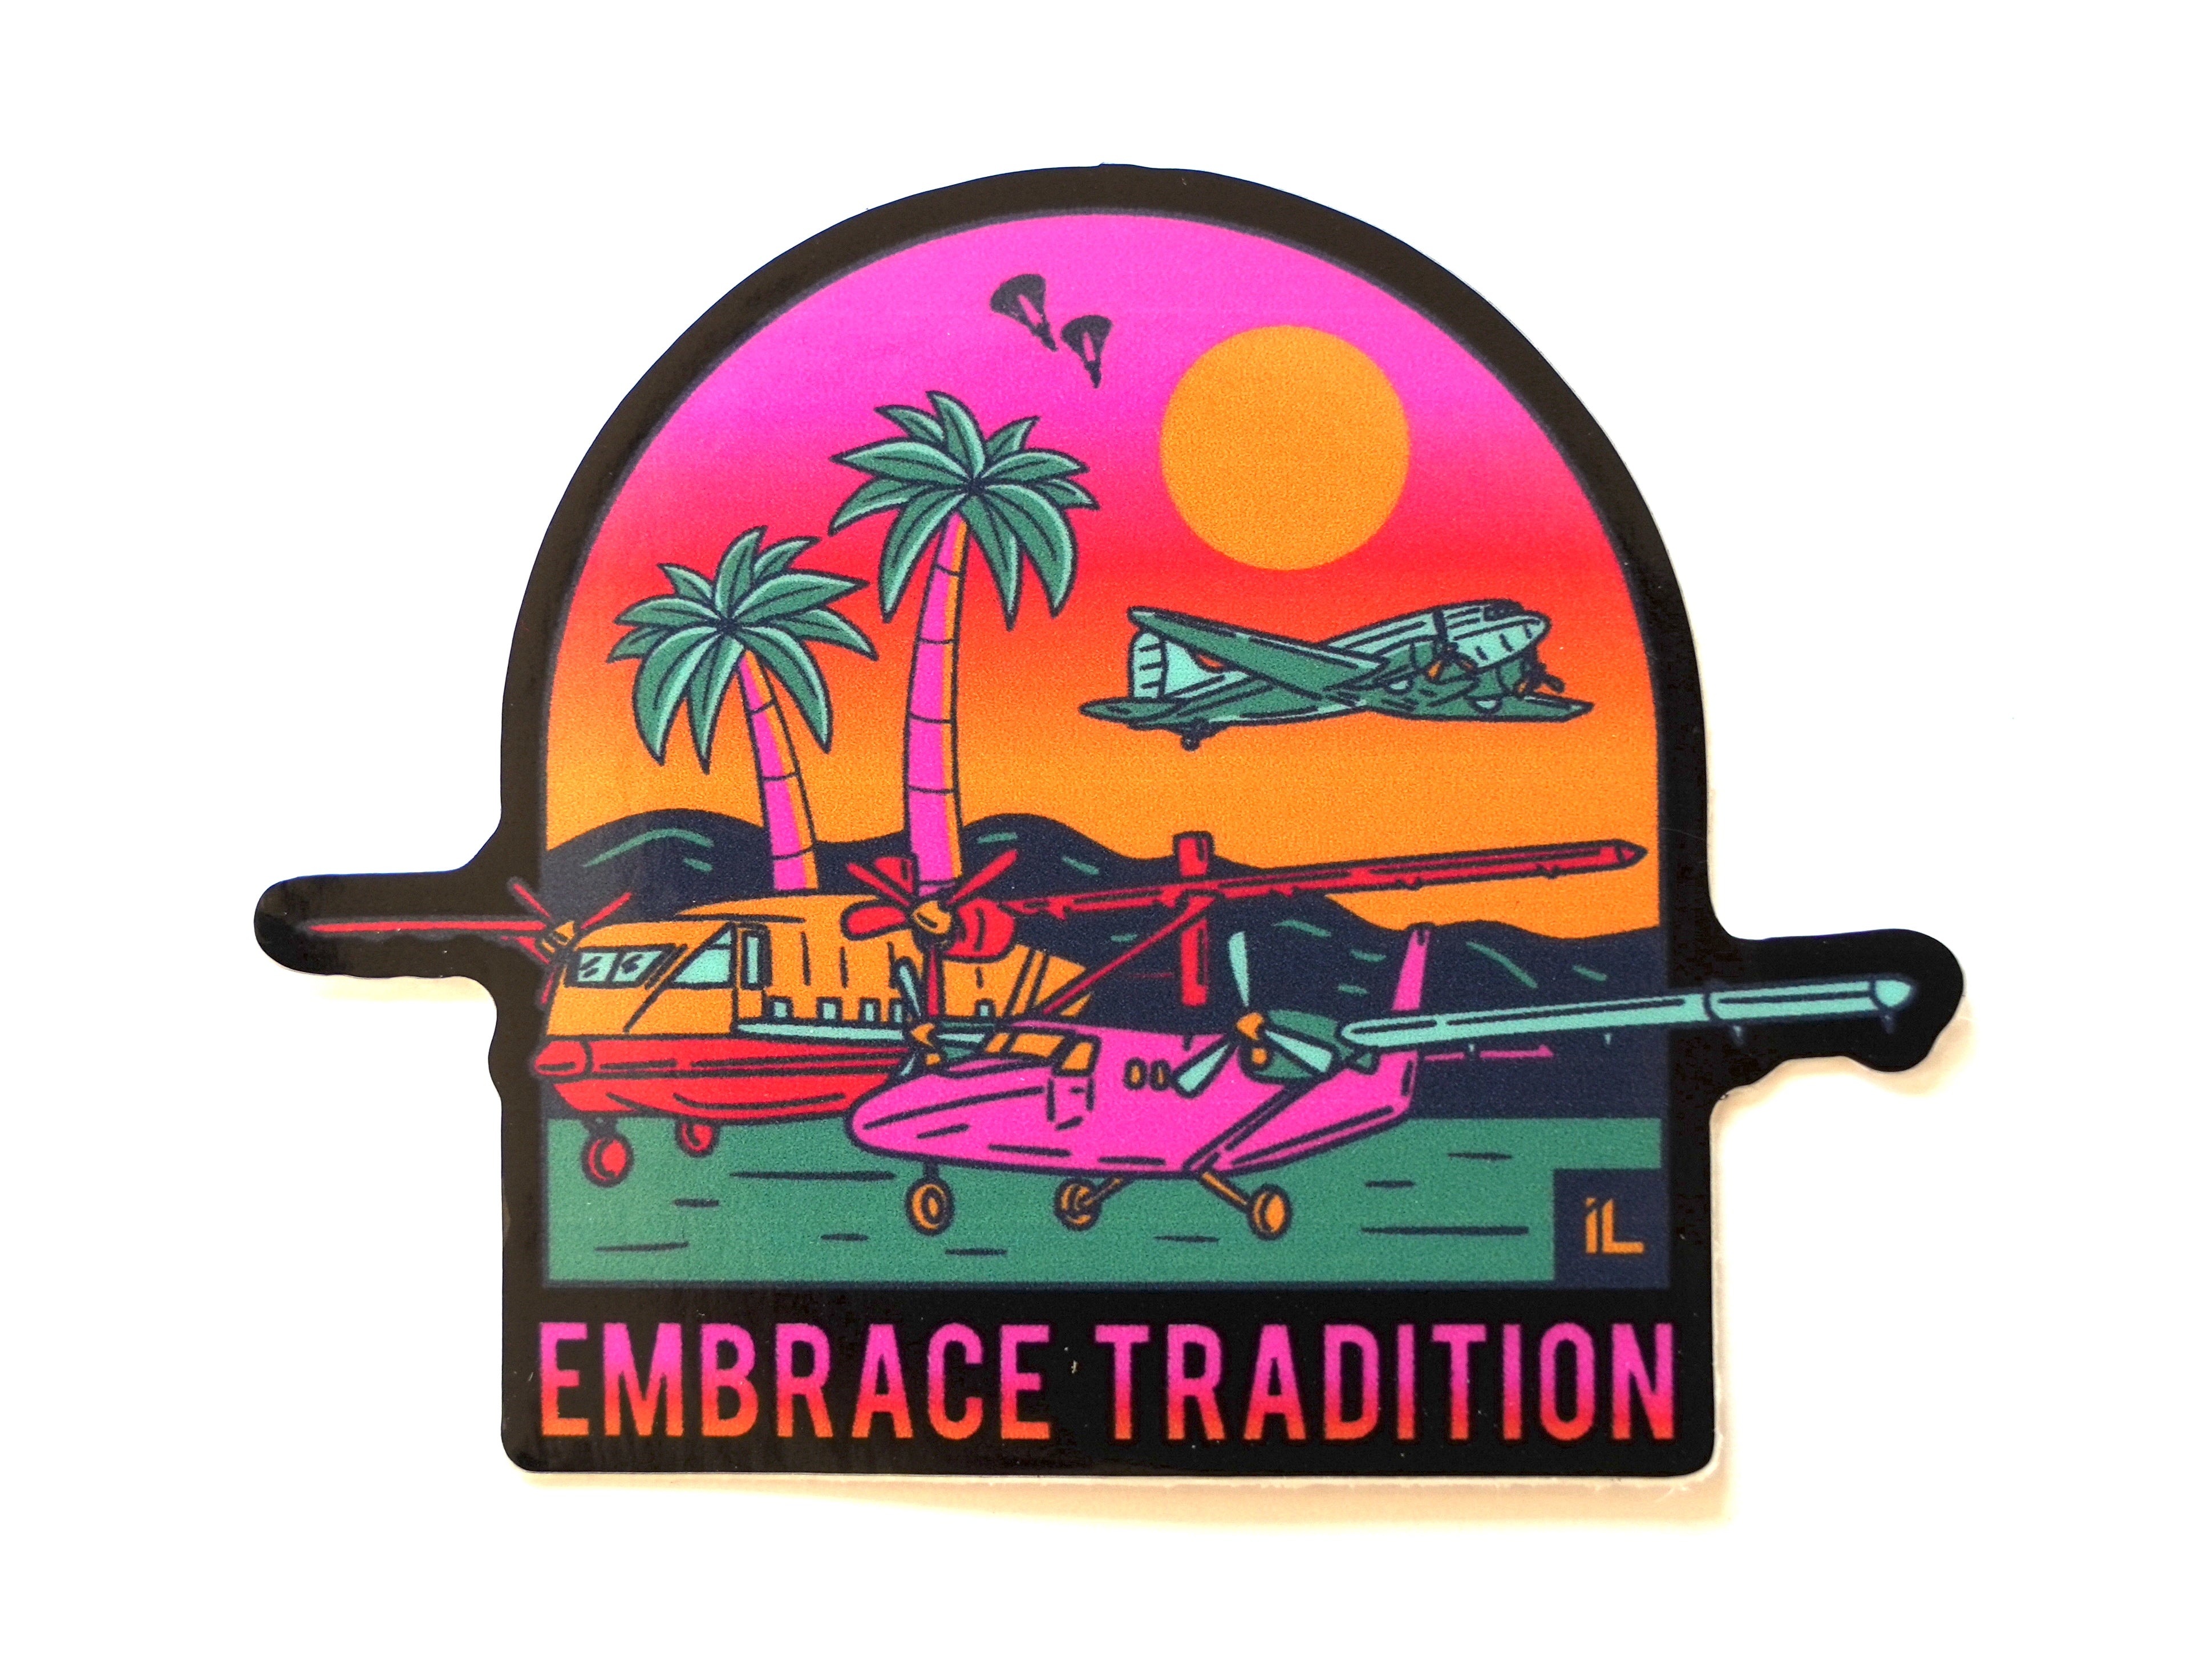 Embrace tradition